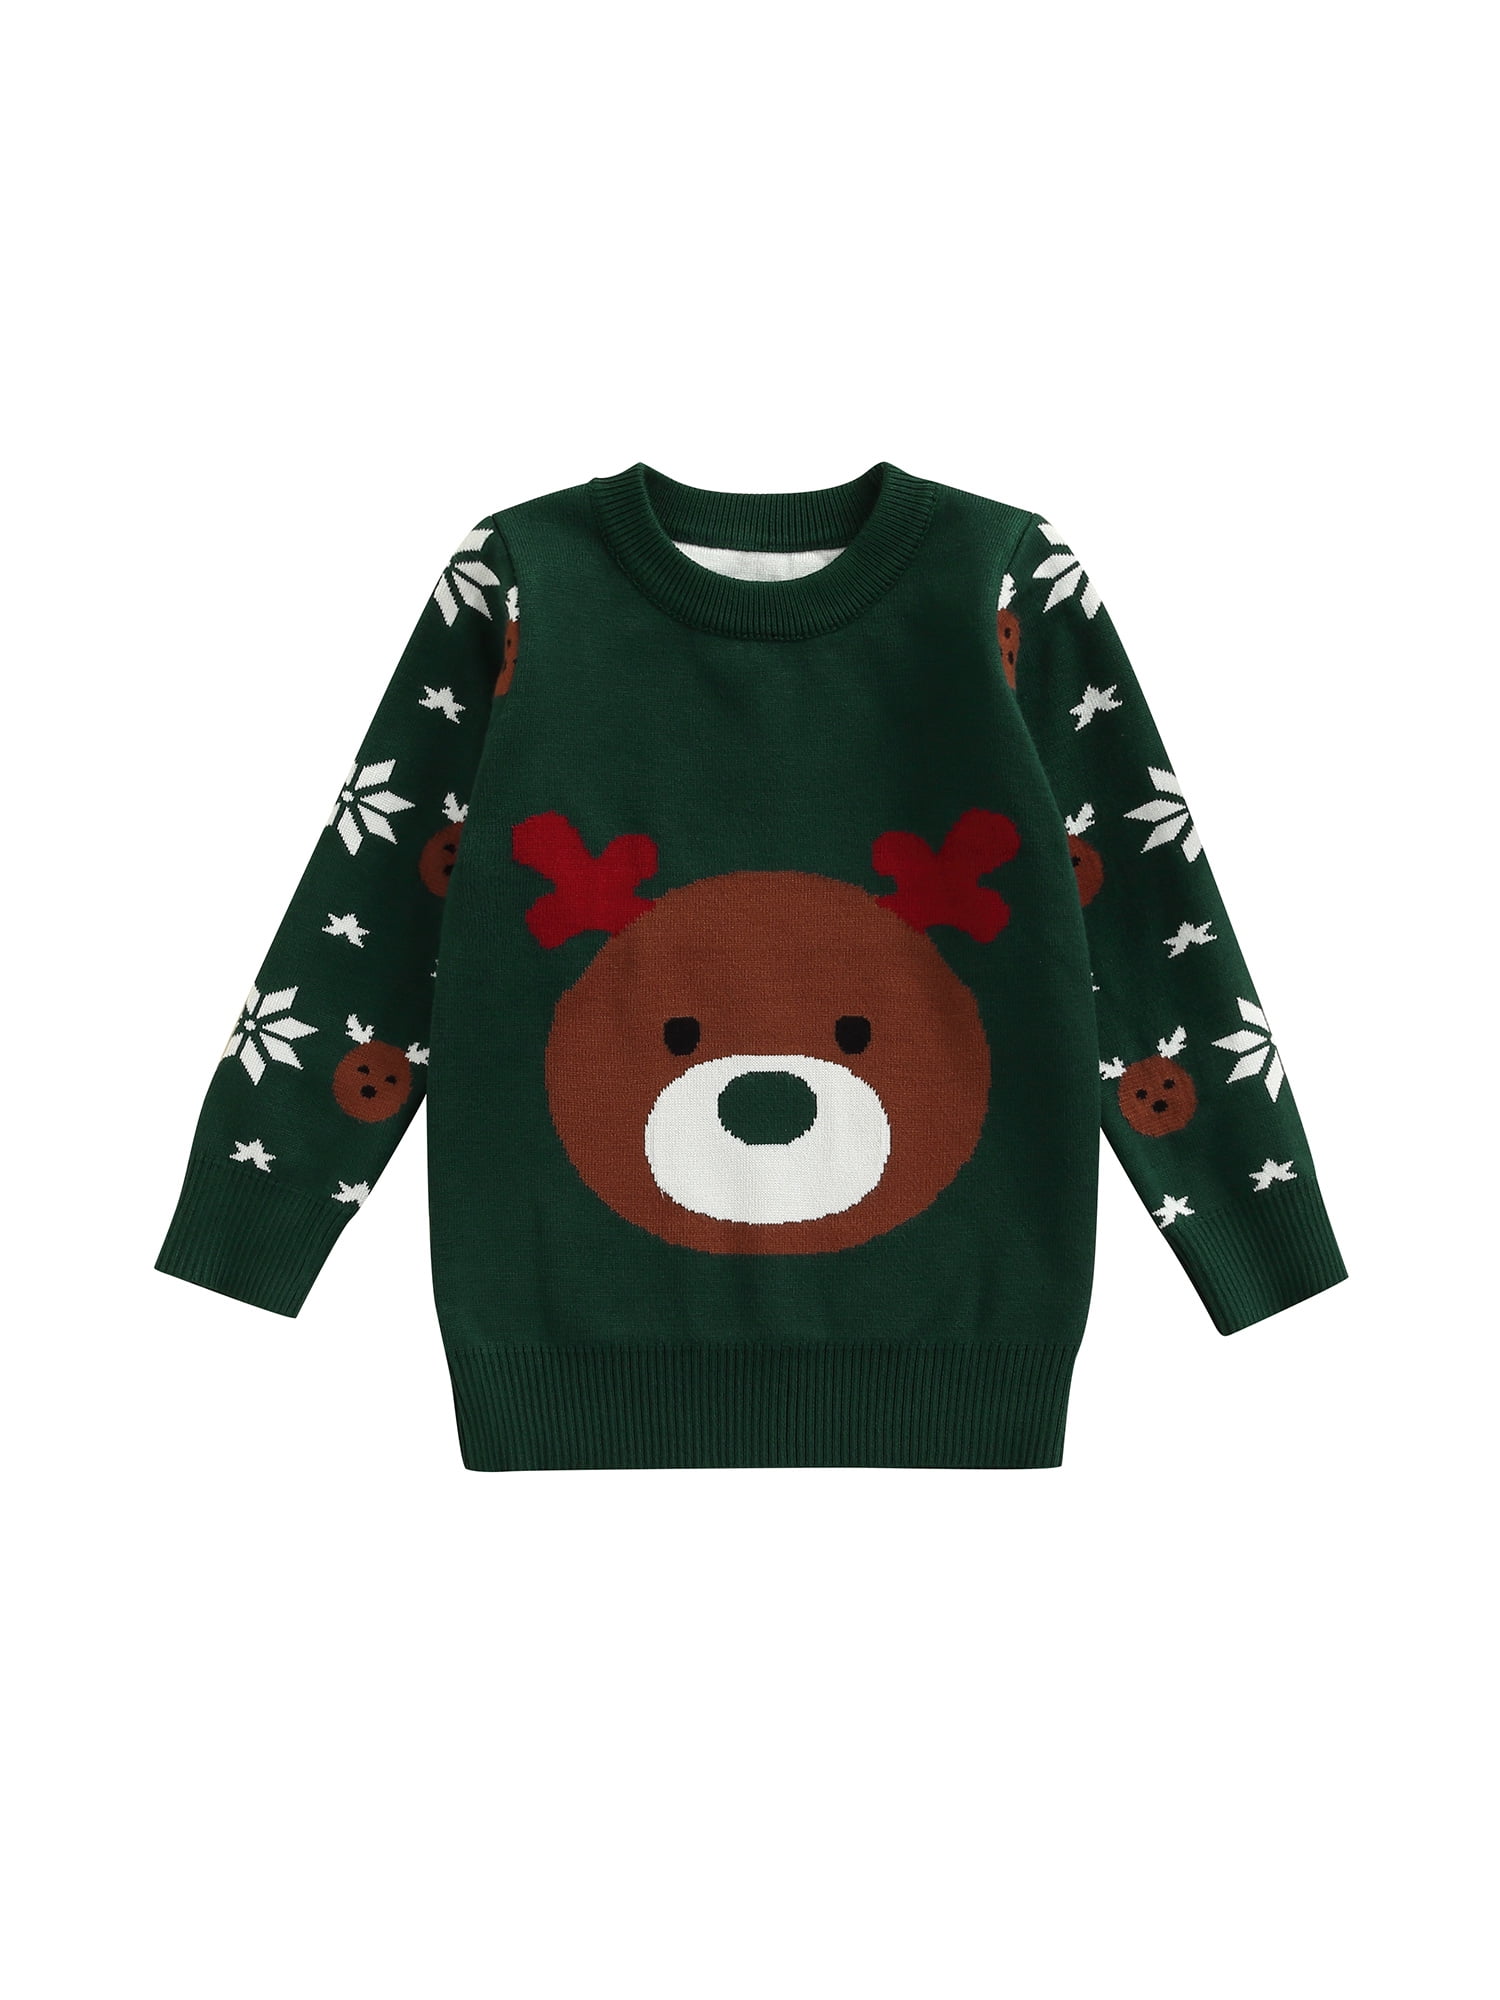 Details about   Xmas Cats with Reindeer Antler Headband Ugly Christmas Toddler/Kids Sweatshirts